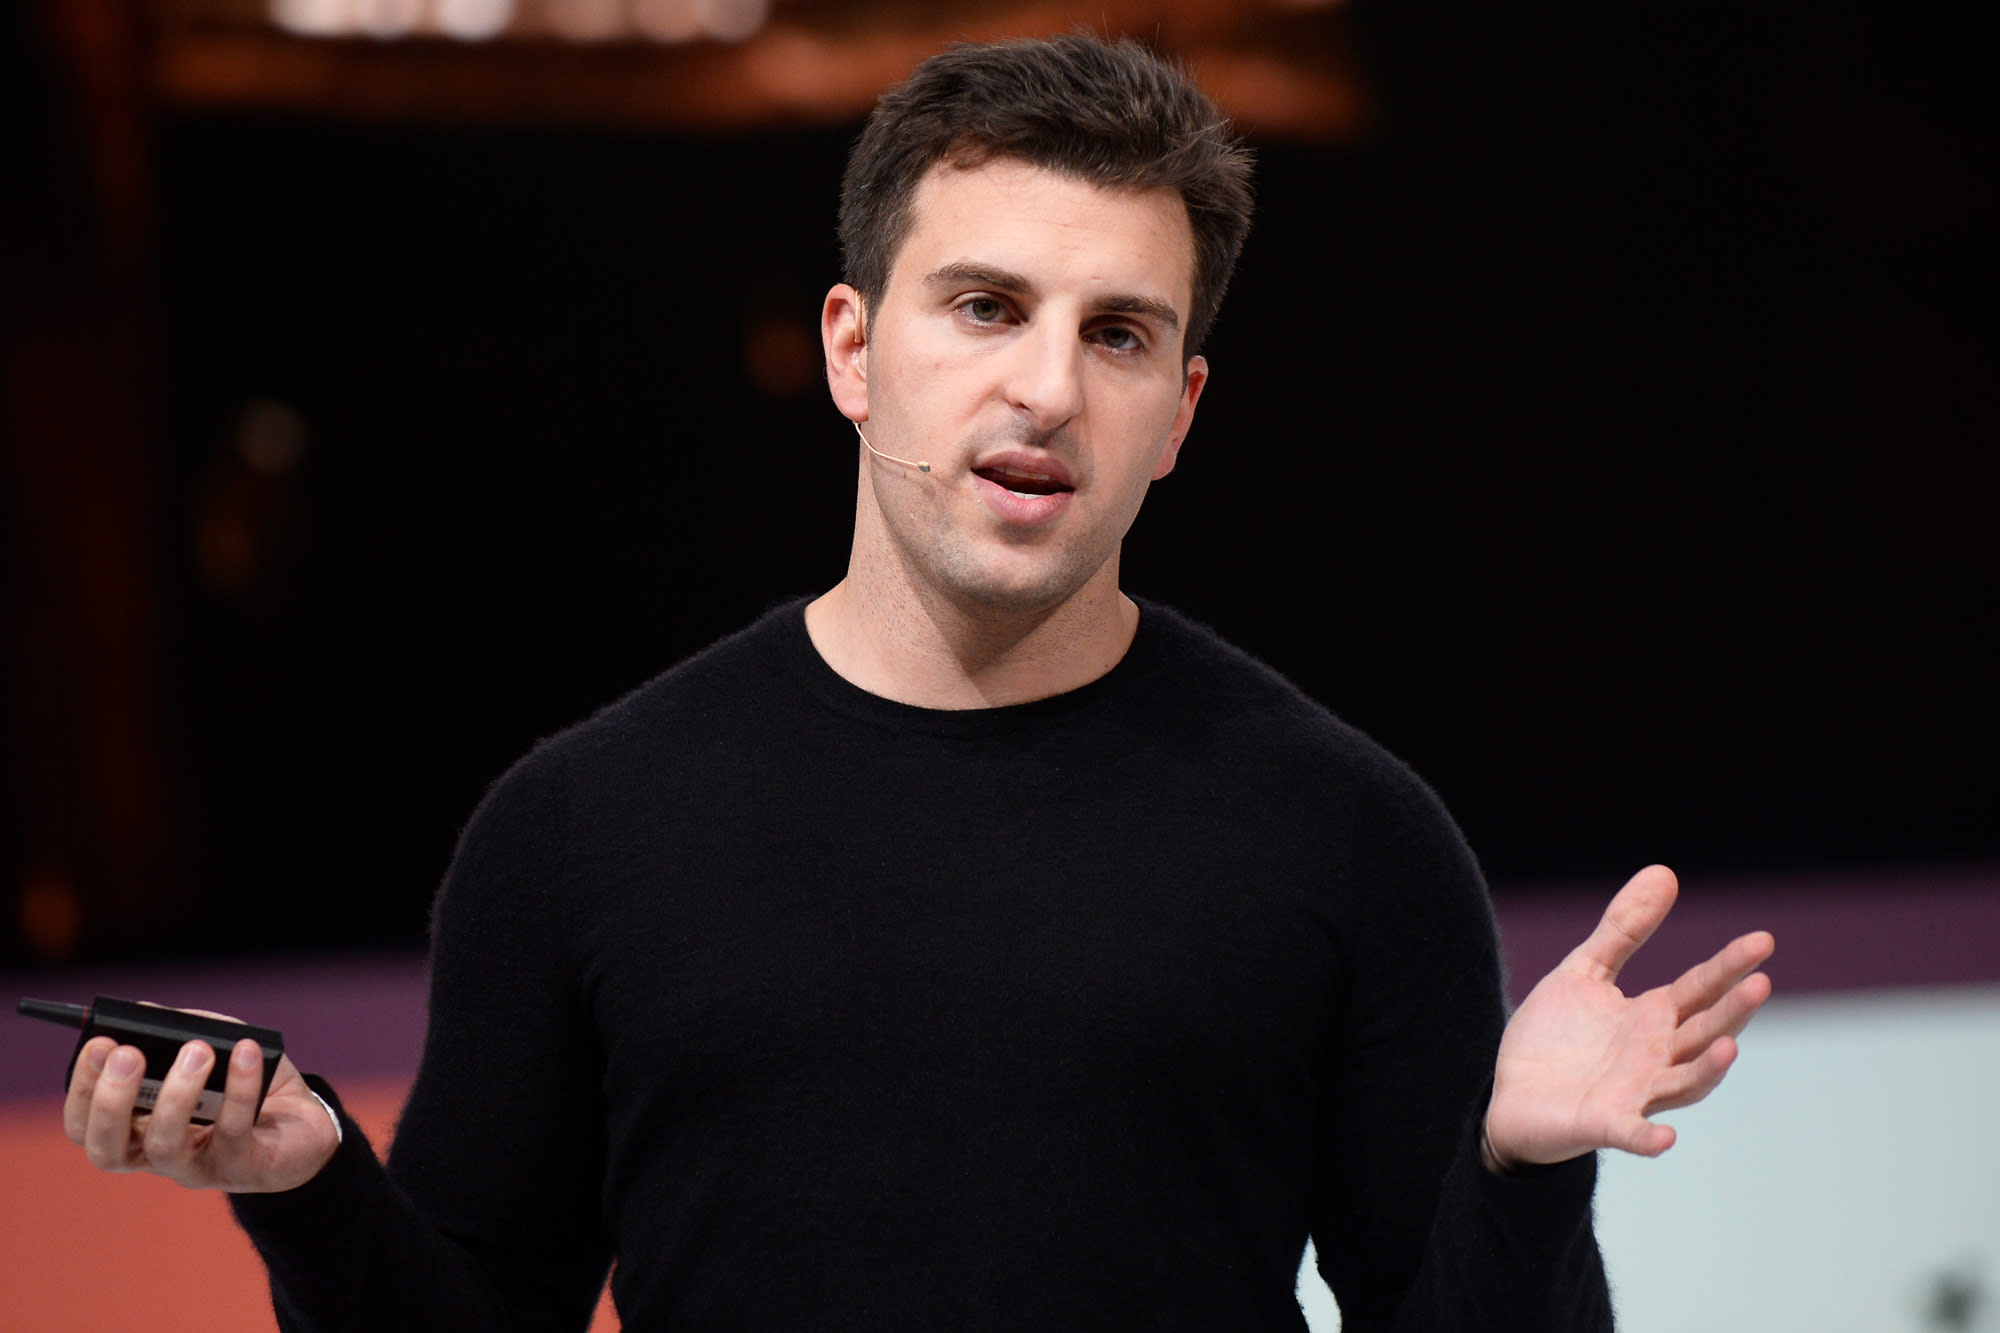 Airbnb seeks to raise roughly $3 billion in IPO